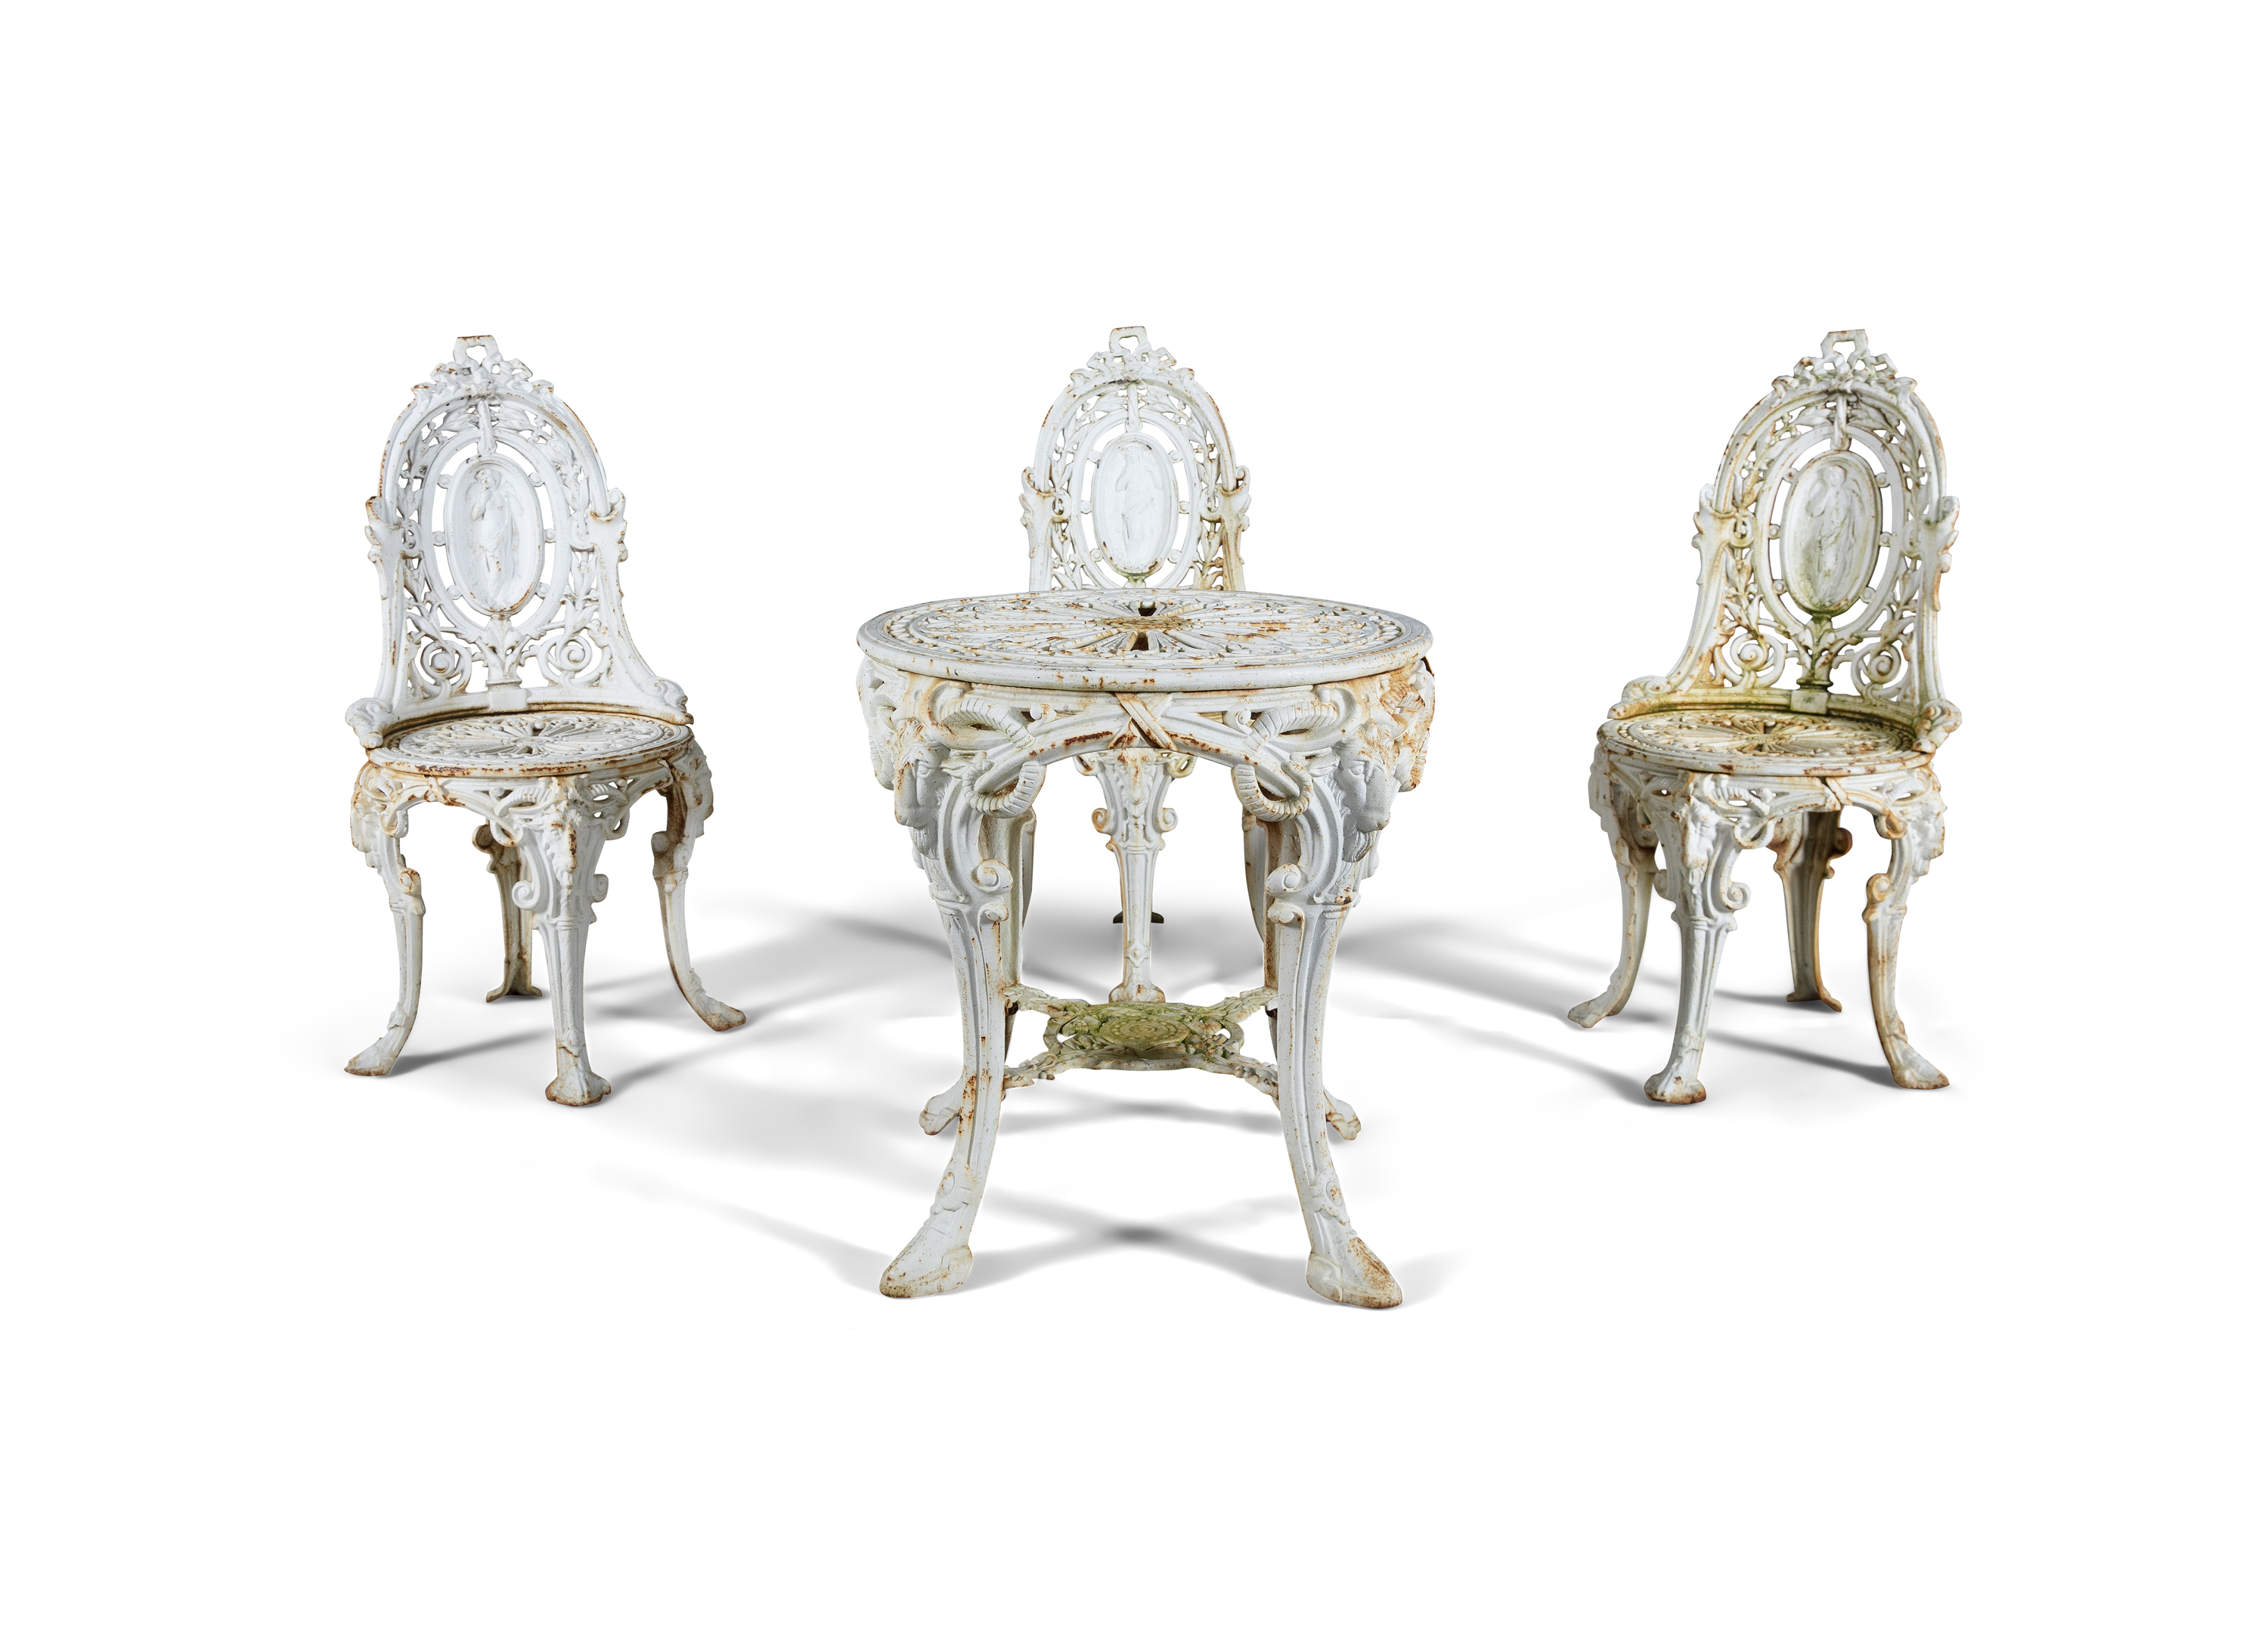 A WHITE PAINTED CAST IRON GARDEN TABLE AND THREE CHAIRS, the table with pierced circular geometric